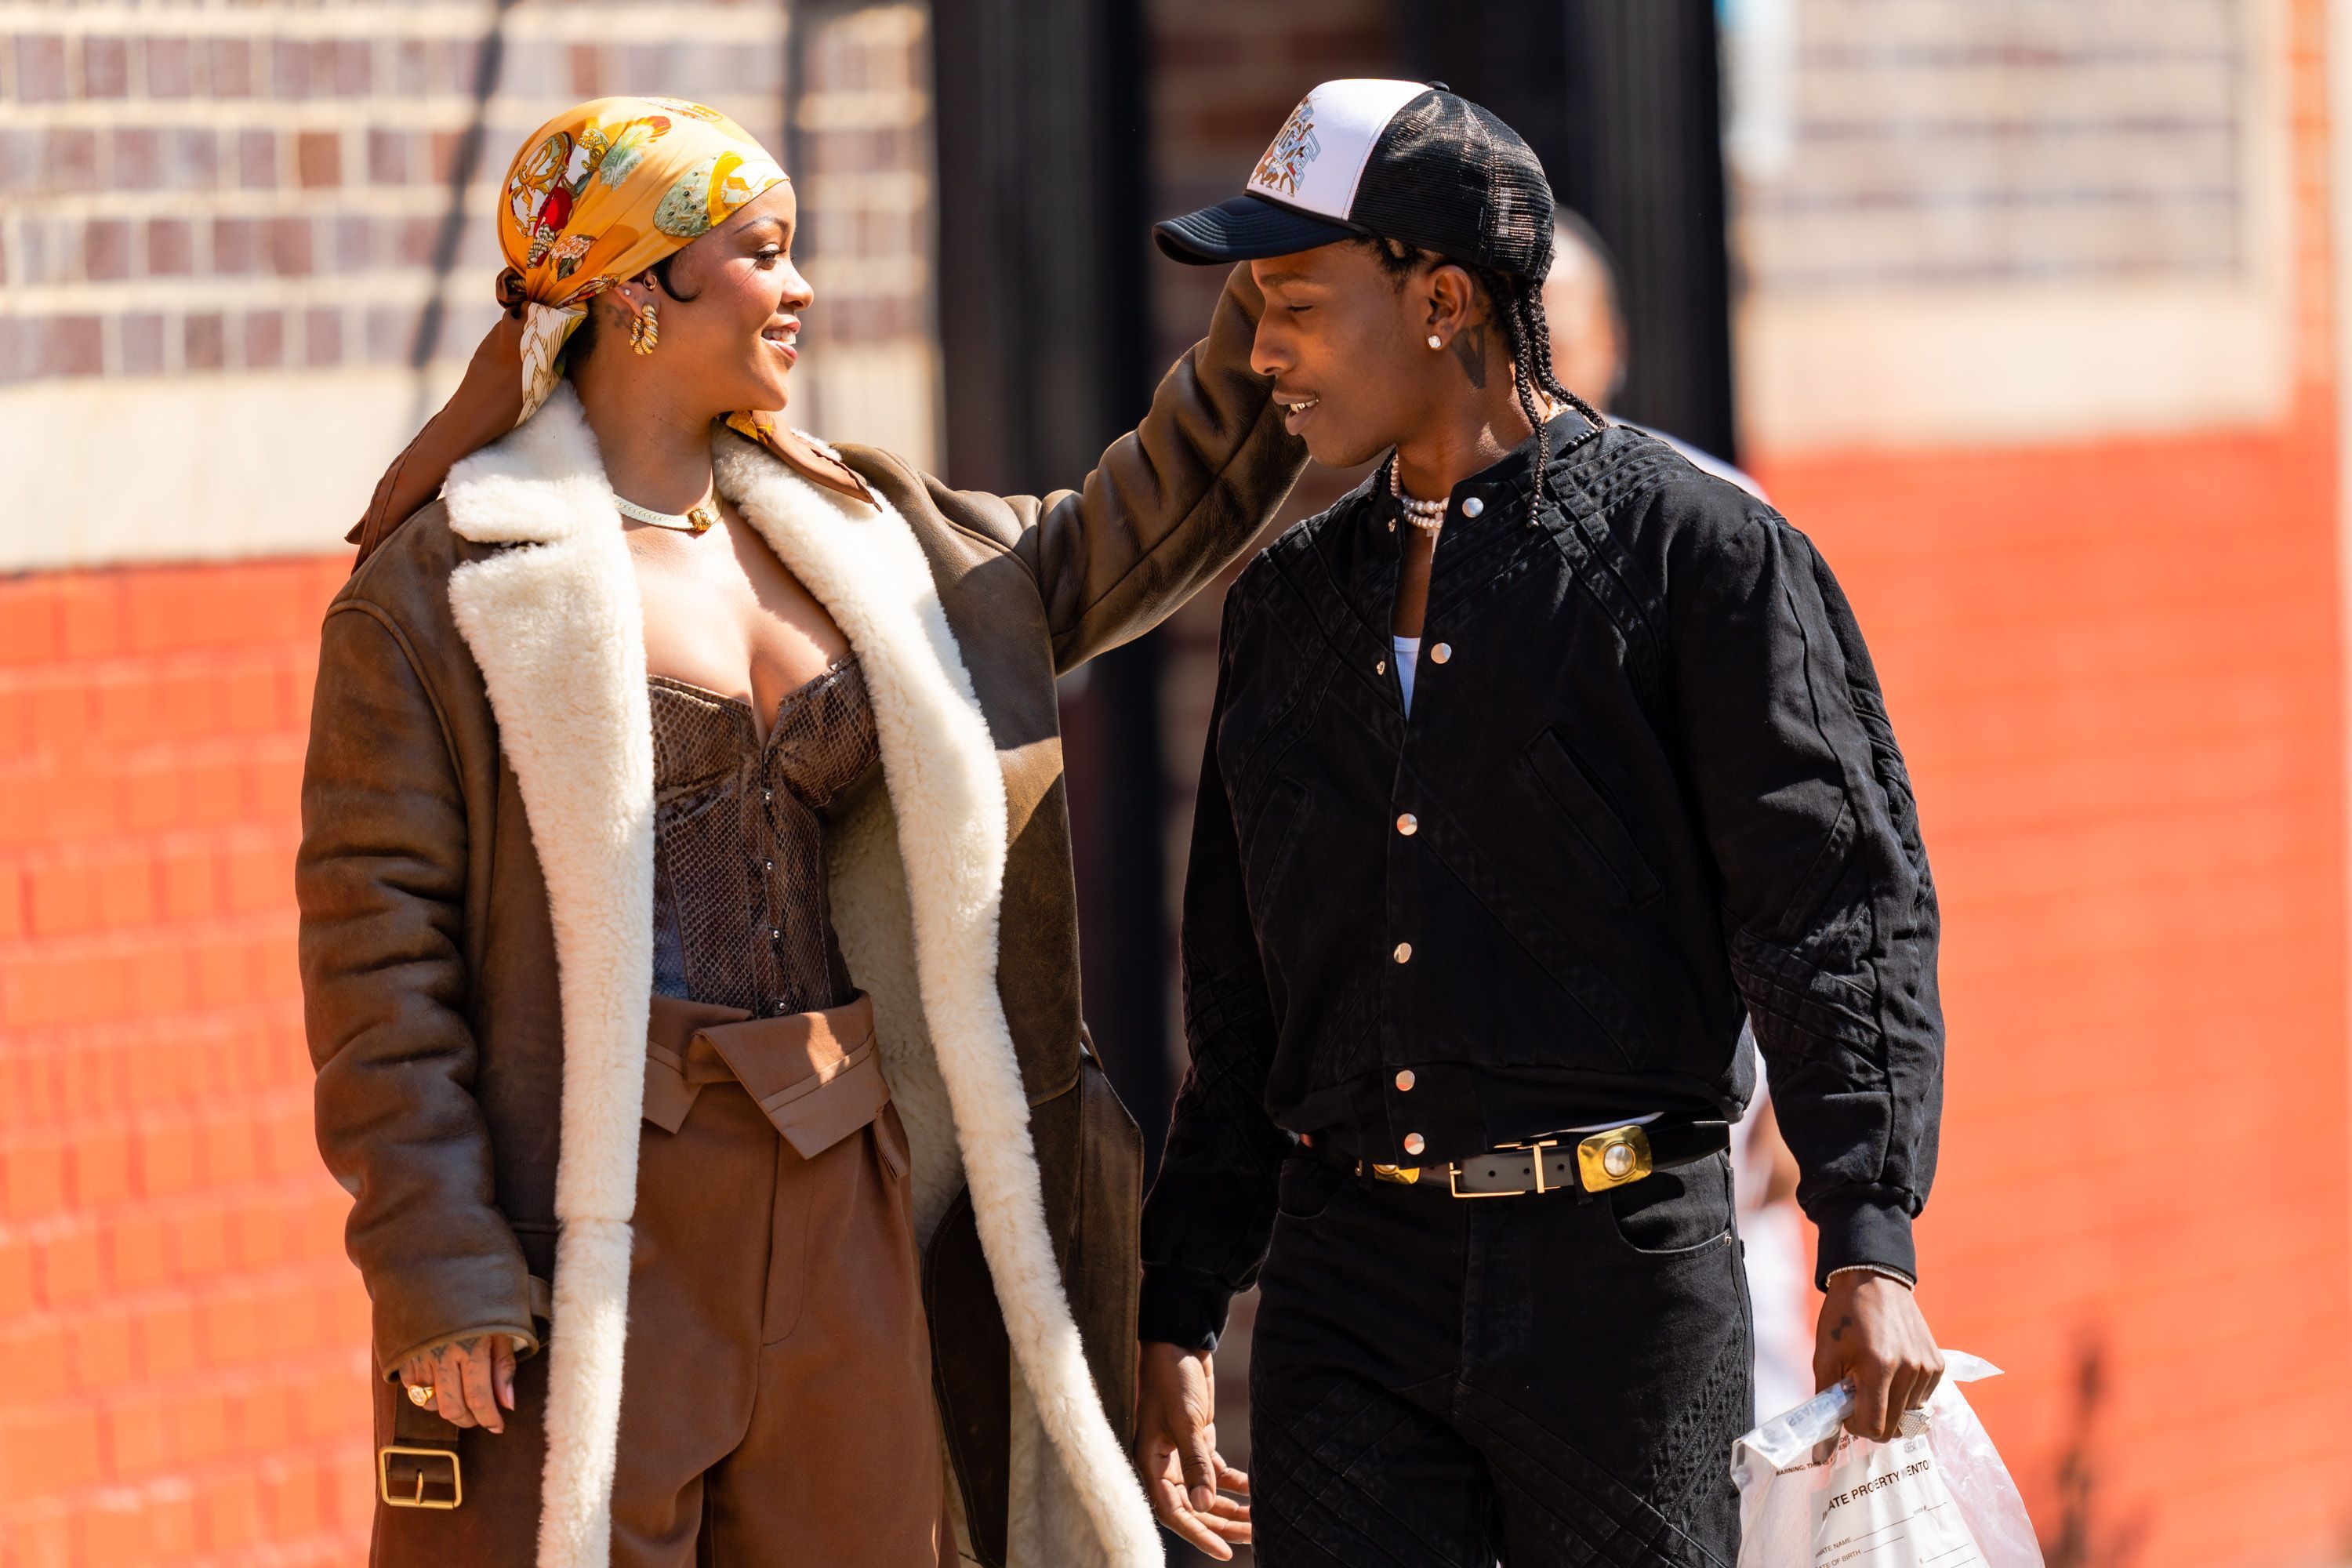 Rihanna and A$AP Rocky seen filming a music video in the Bronx on July 10, 2021, in New York City. | Source: Gotham/GC Images/Getty Images